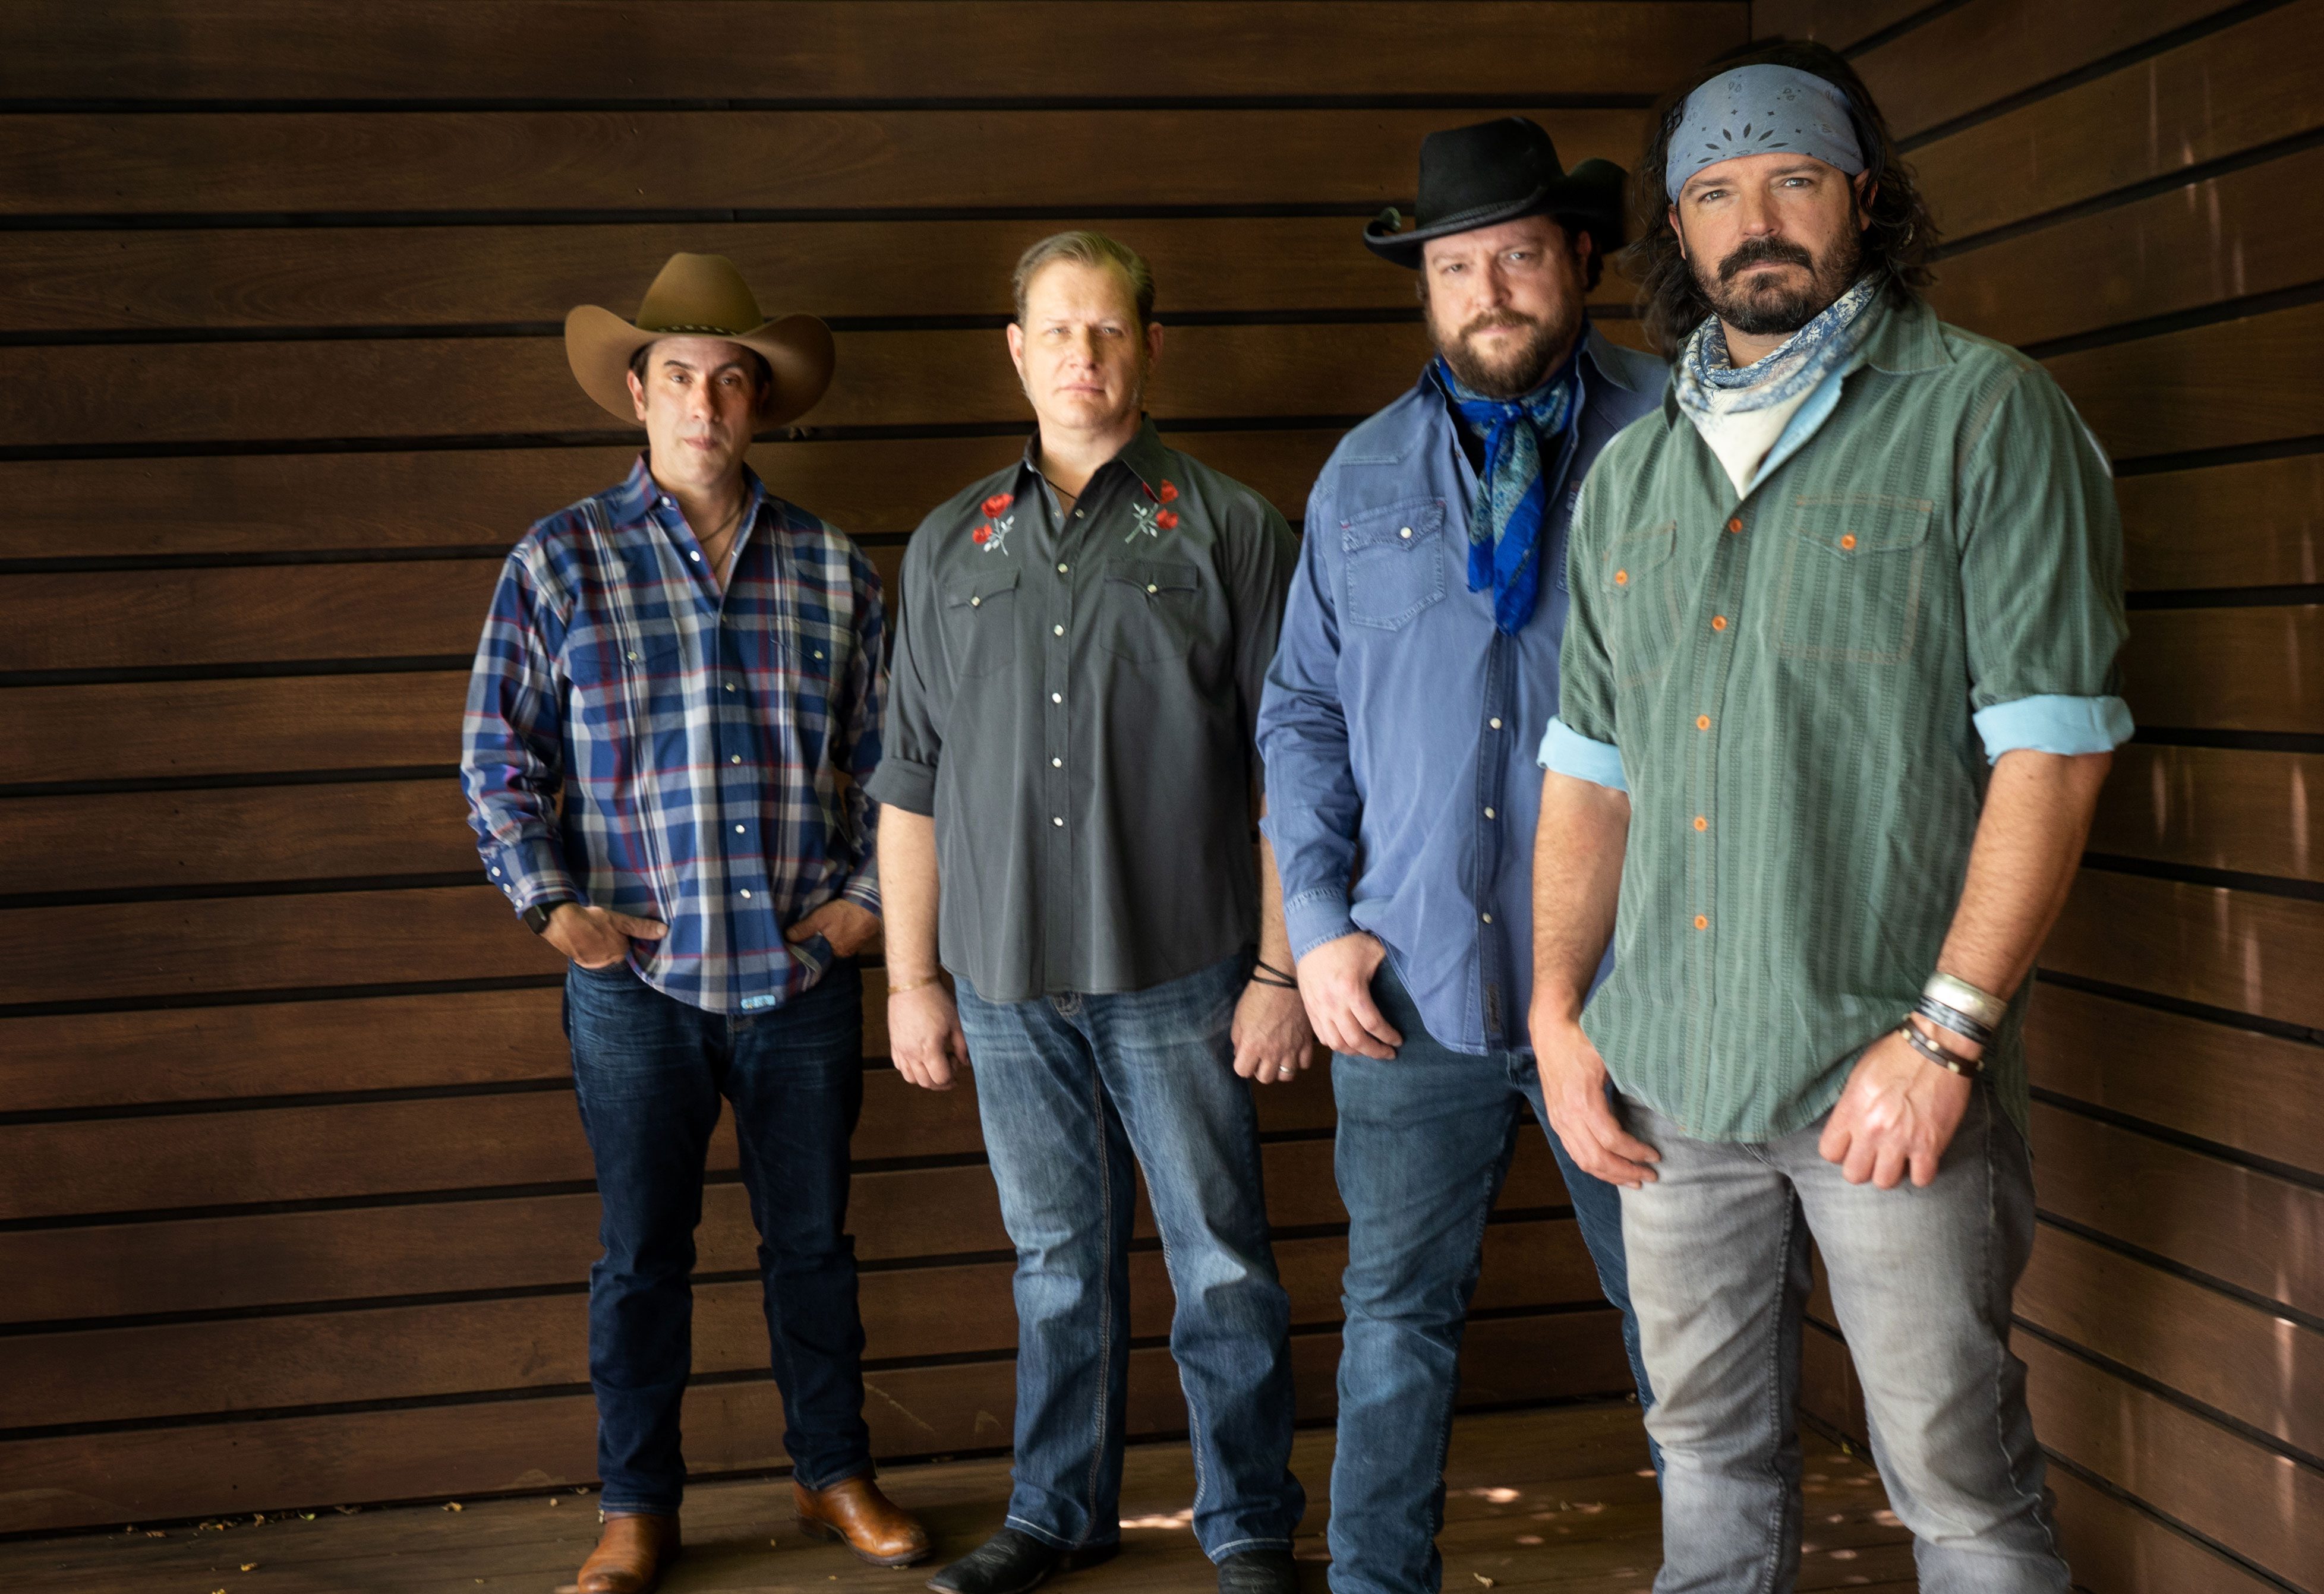 Reckless Kelly